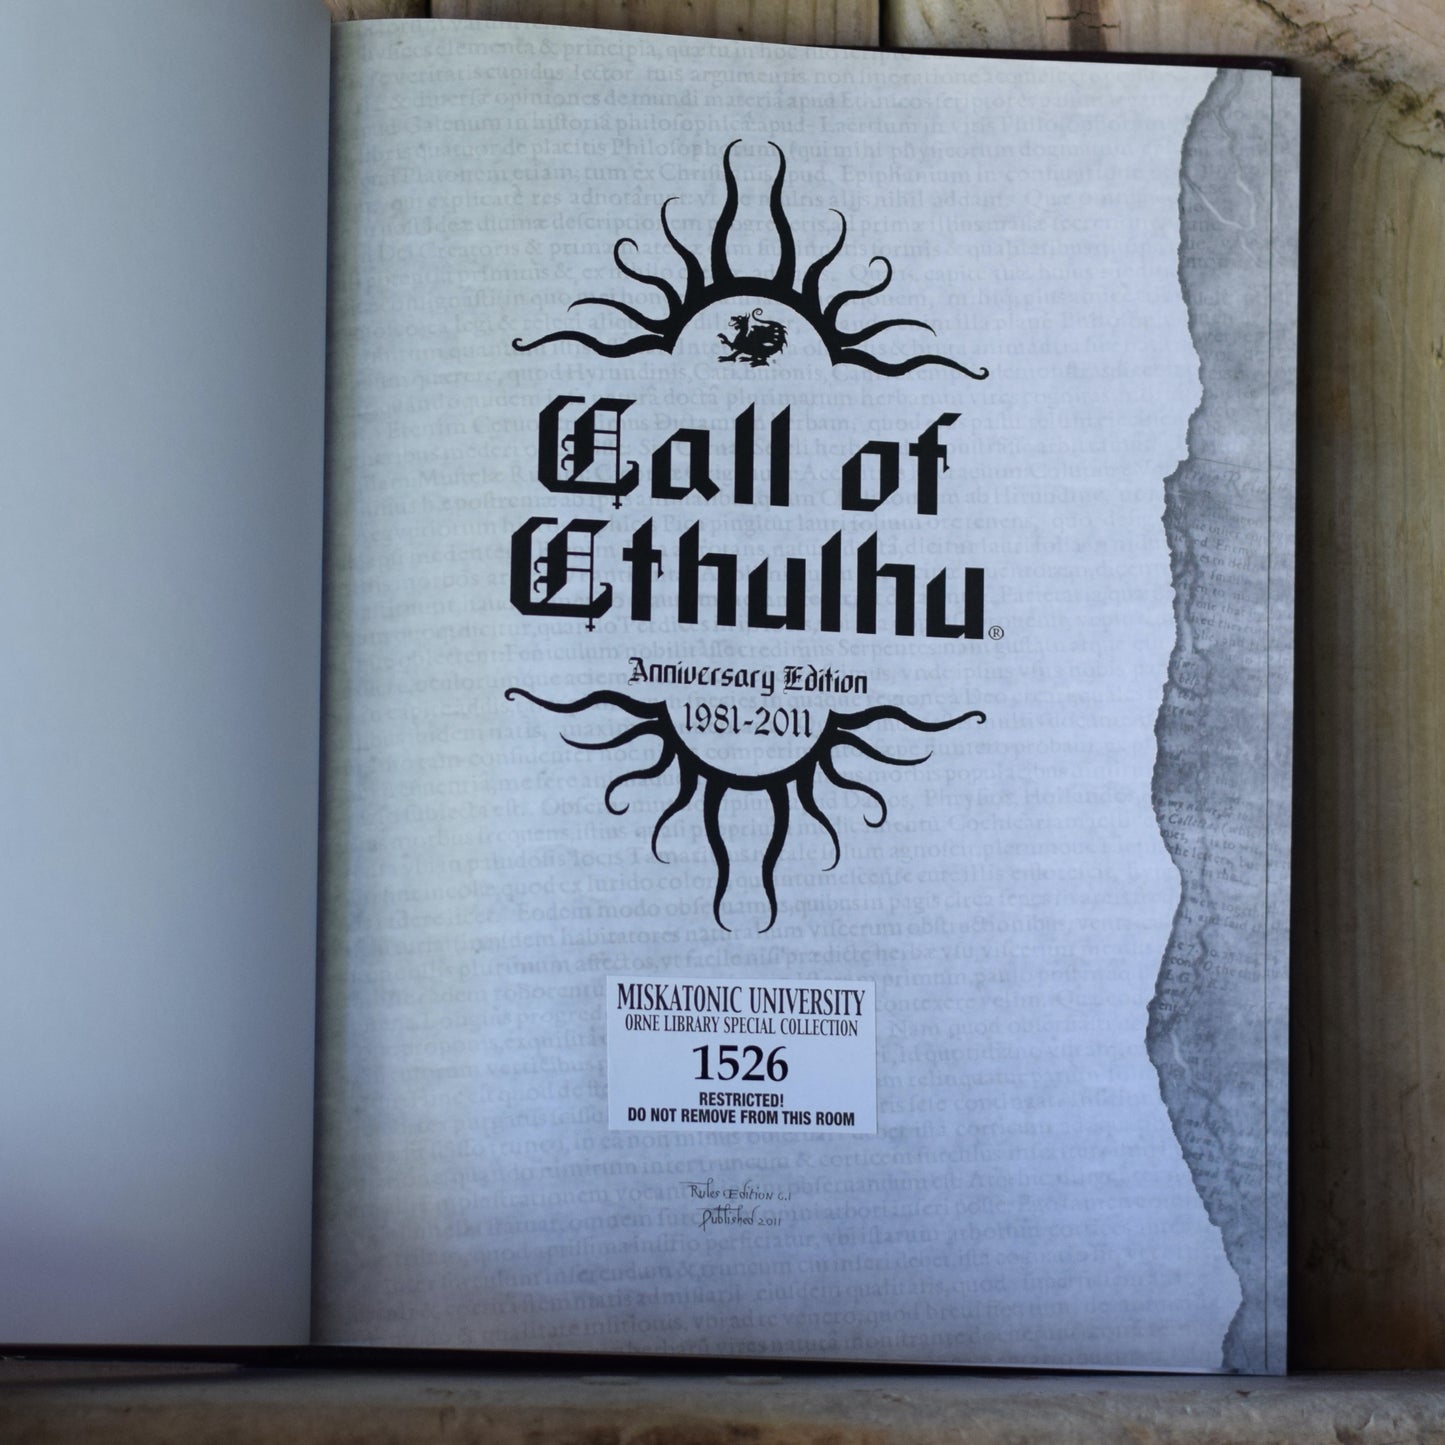 Hardback RPG Book: Call of Cthulhu: 30th Anniversary Letaher-bound Edition